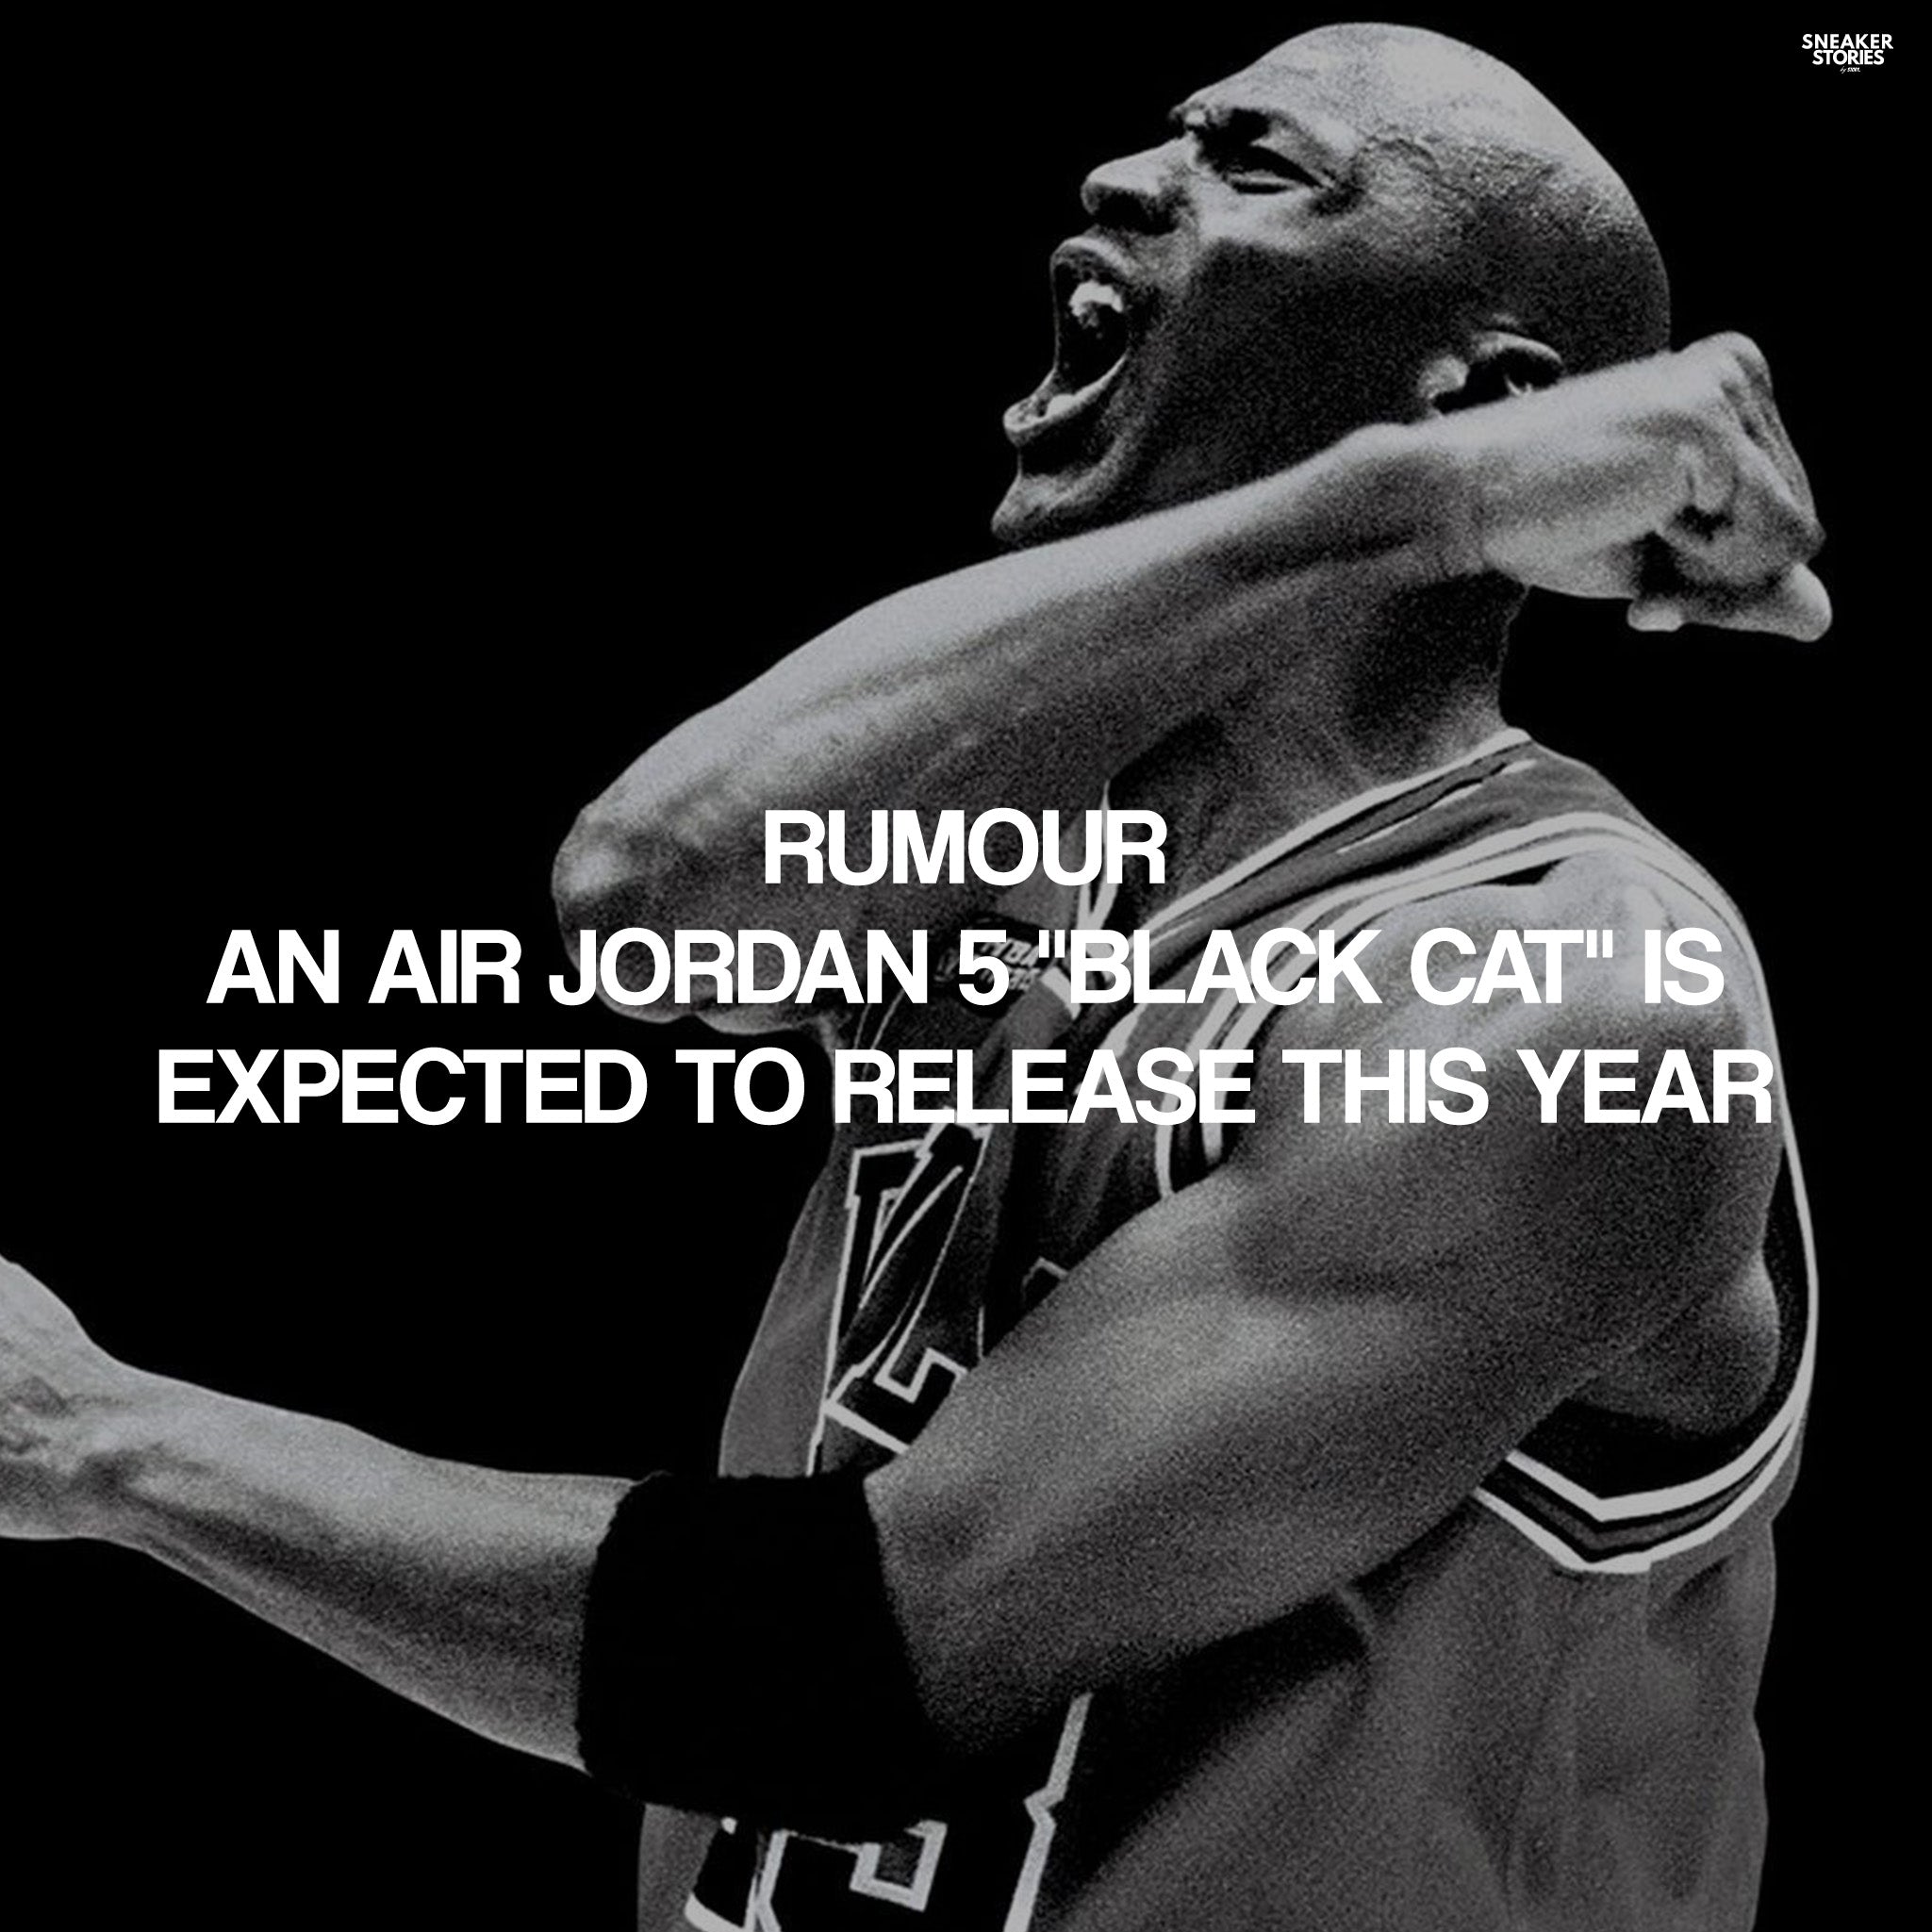 Rumour An Air Jordan 5 "Black Cat" Is Expected to Release This Year